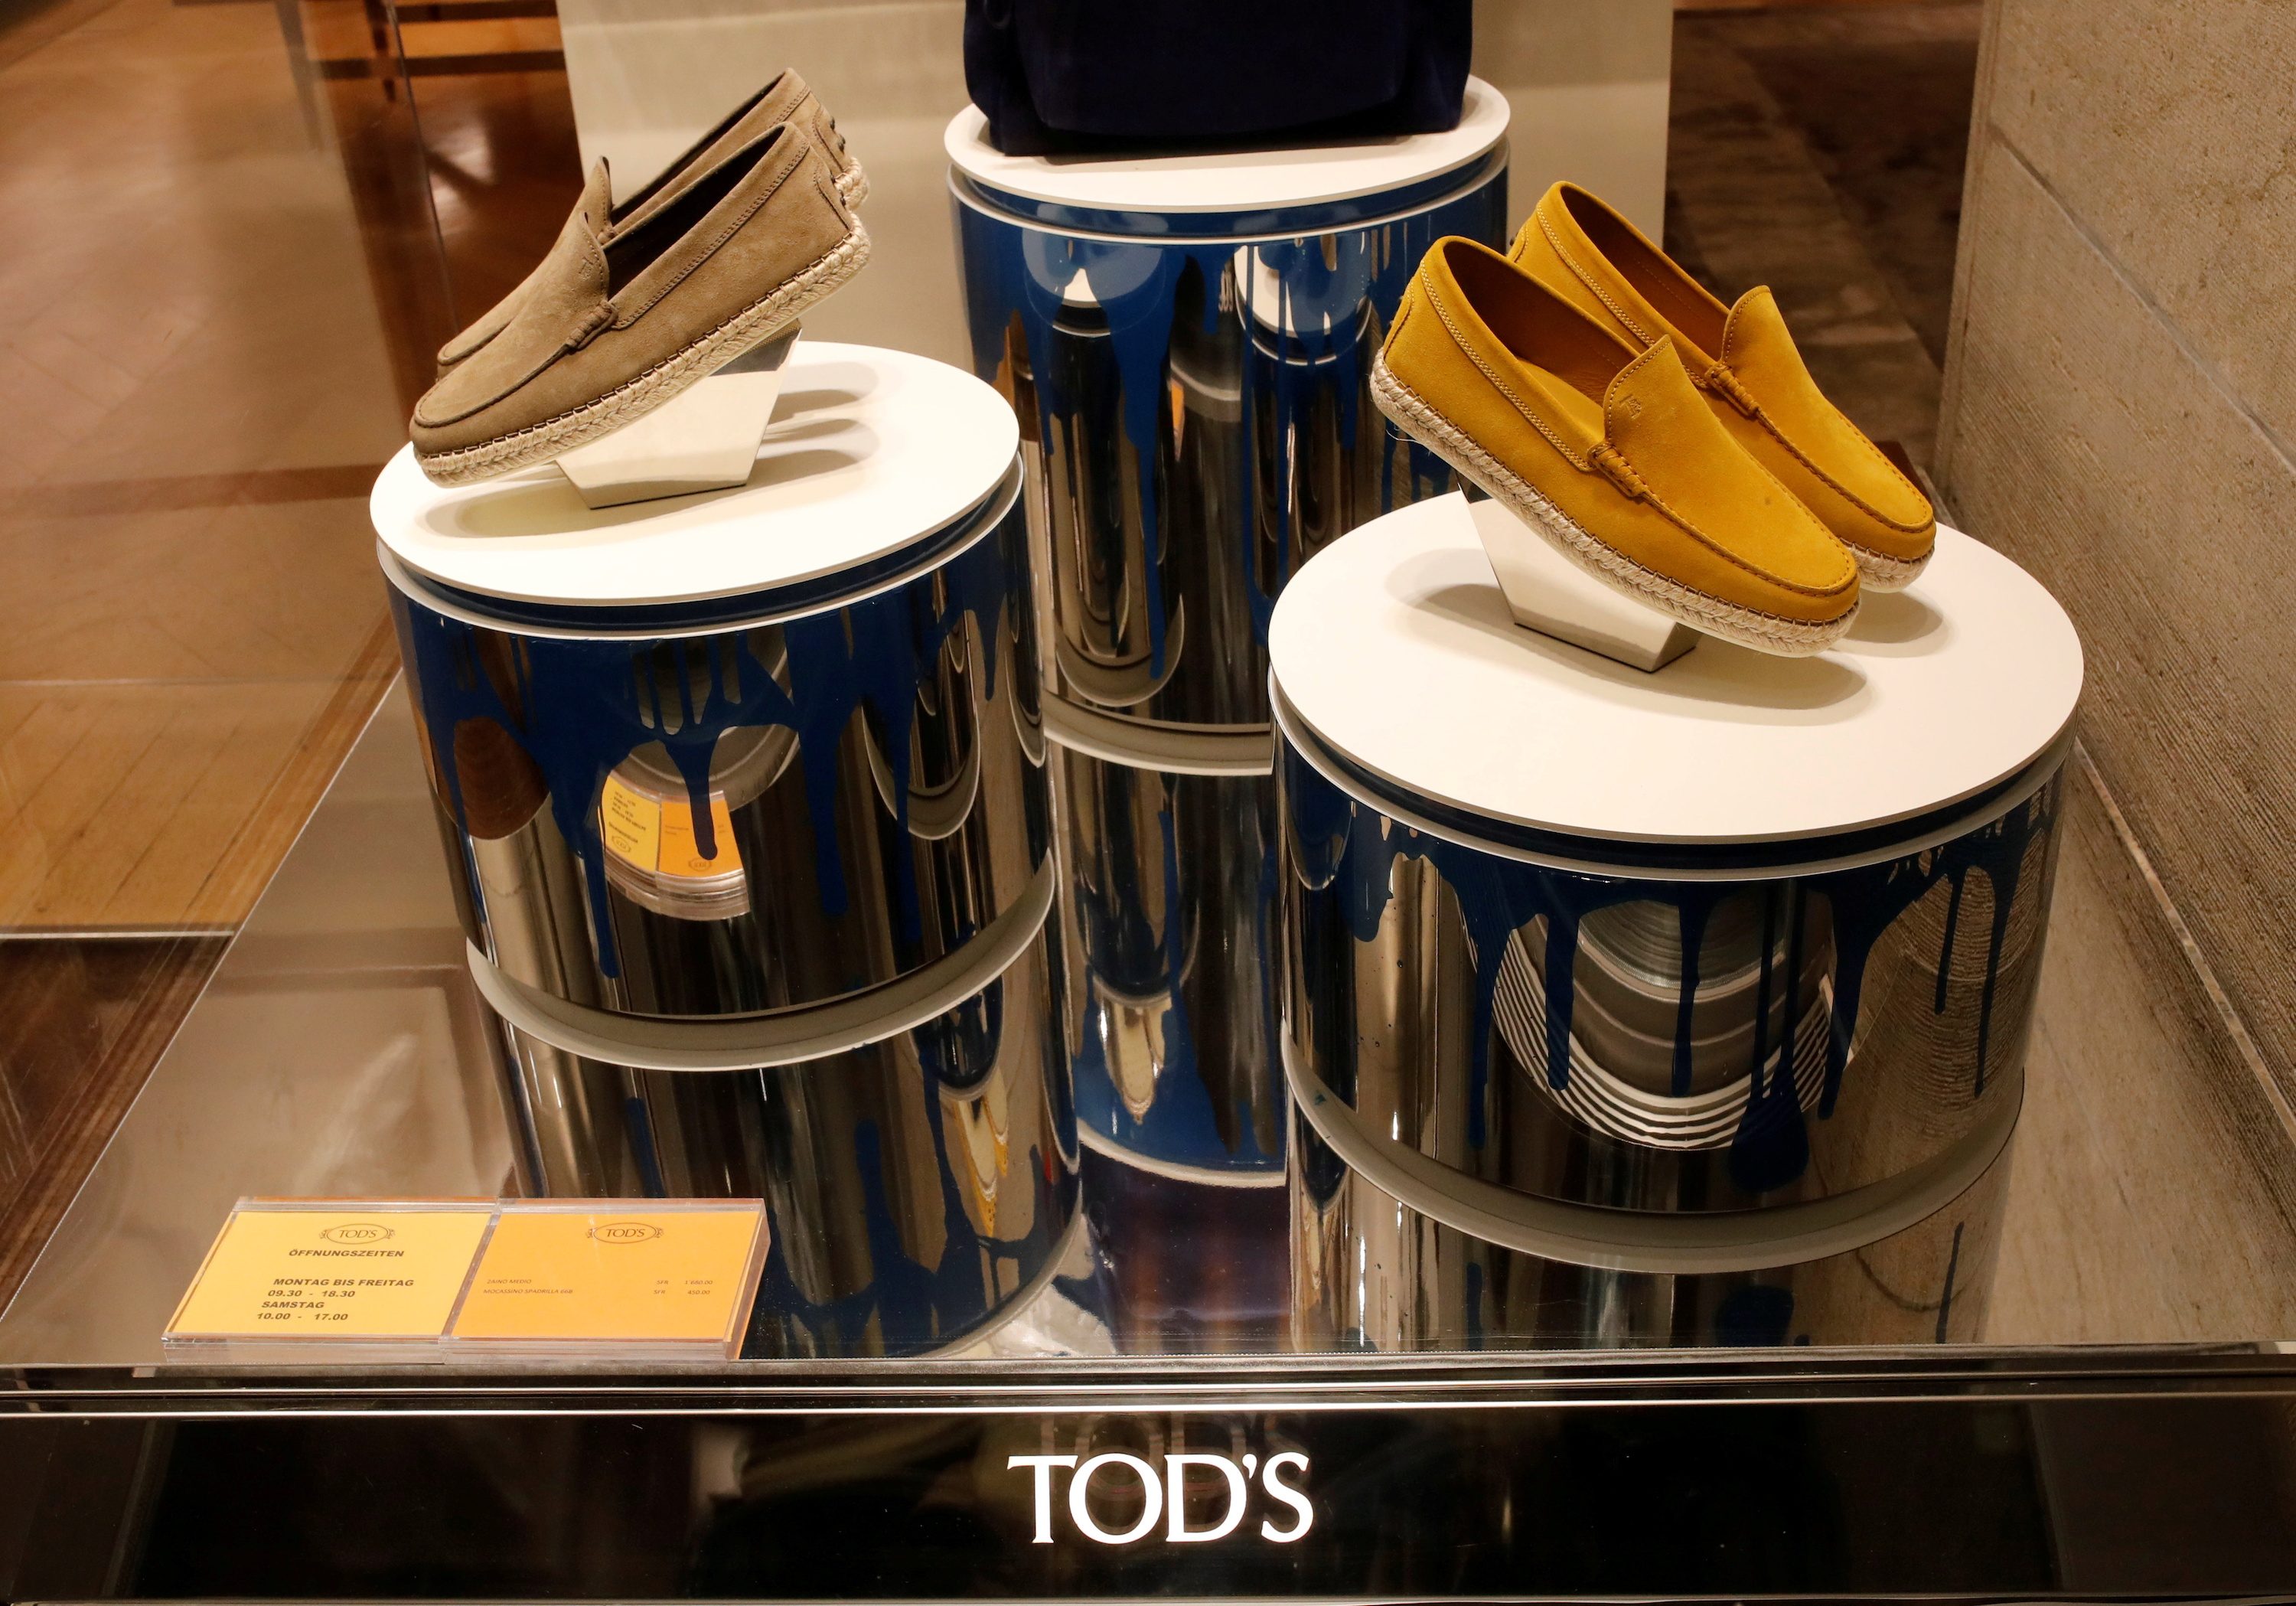 LVMH’s move on Tod’s fuels turnaround, takeover expectations